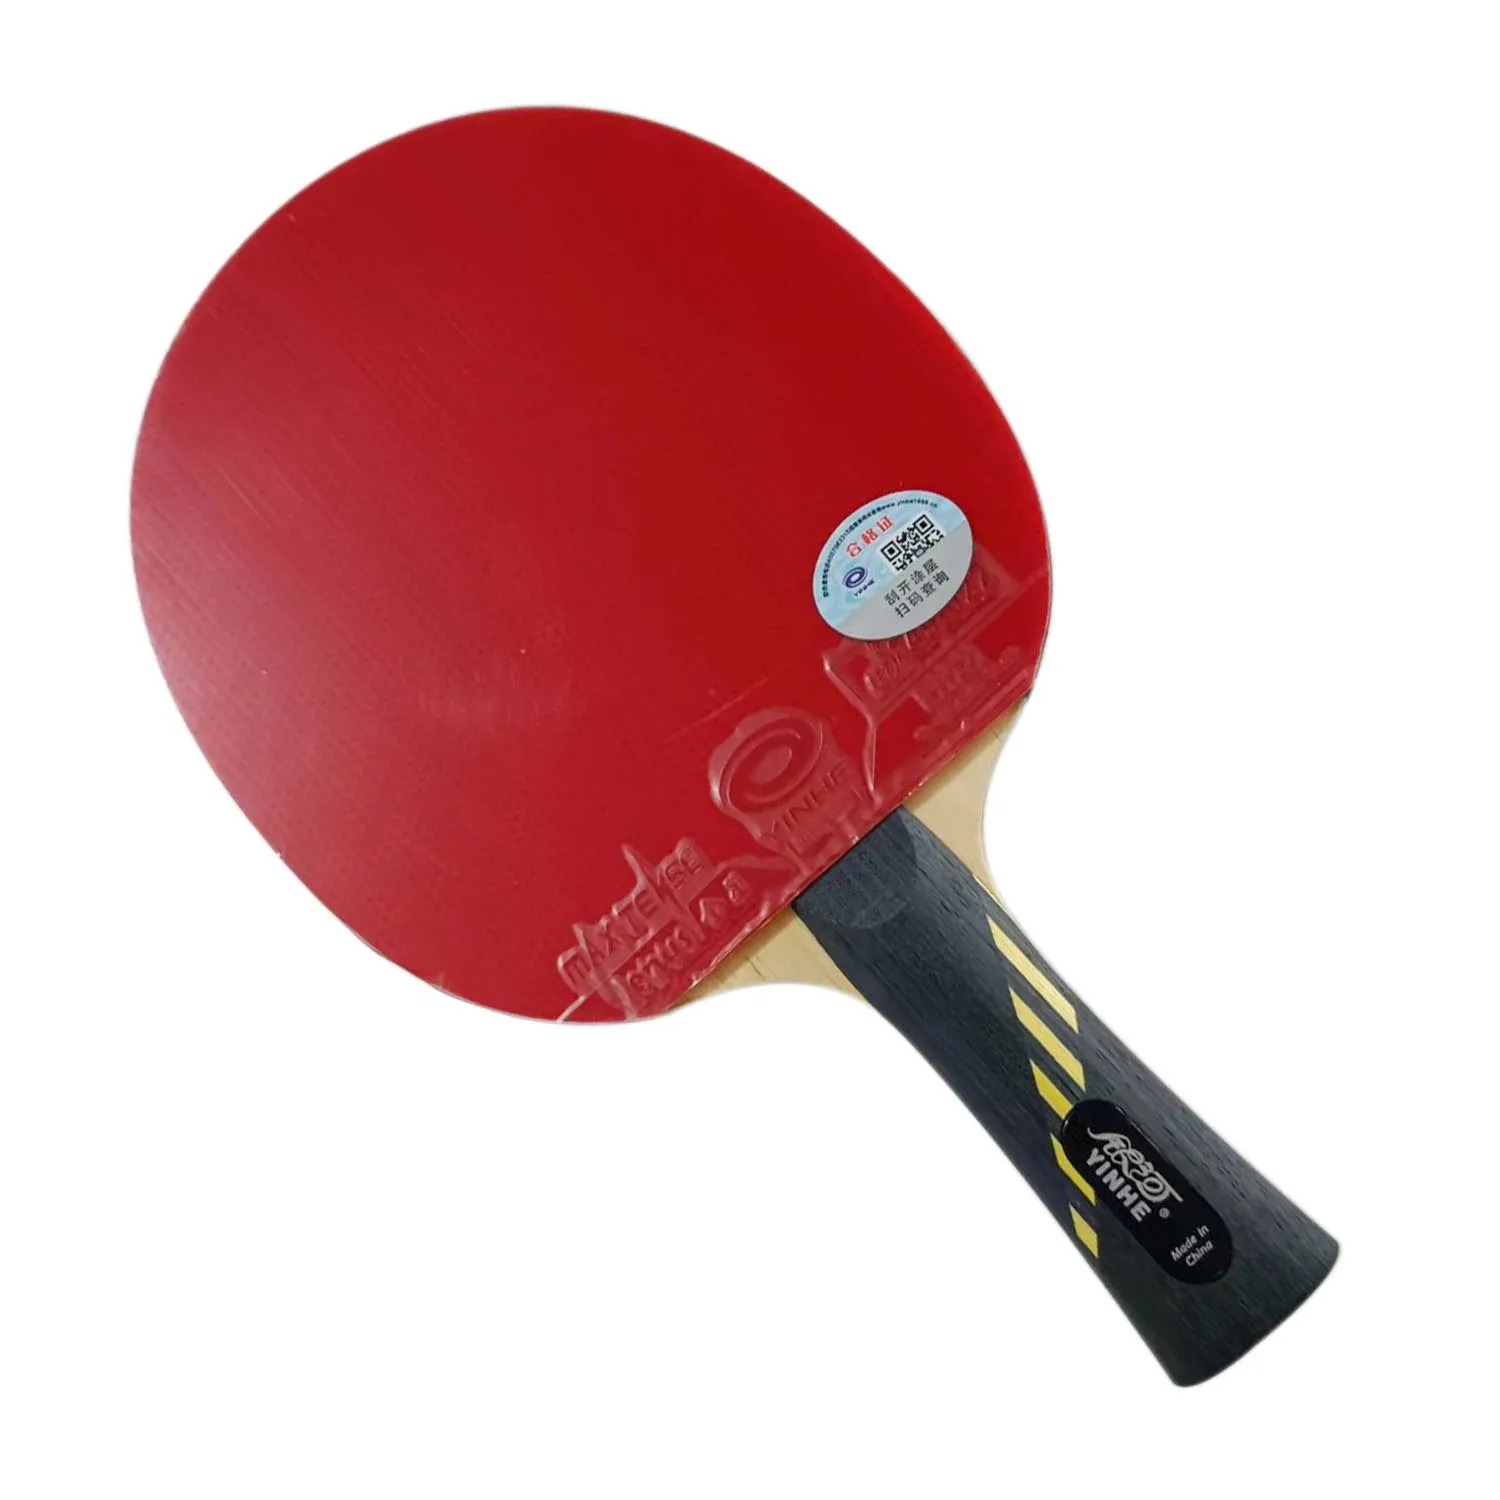 

YINHE 9B 09B 9 Star Racket Galaxy 5 wood+2 carbon OFF++ pips-in rubber table tennis rackets ping pong bat